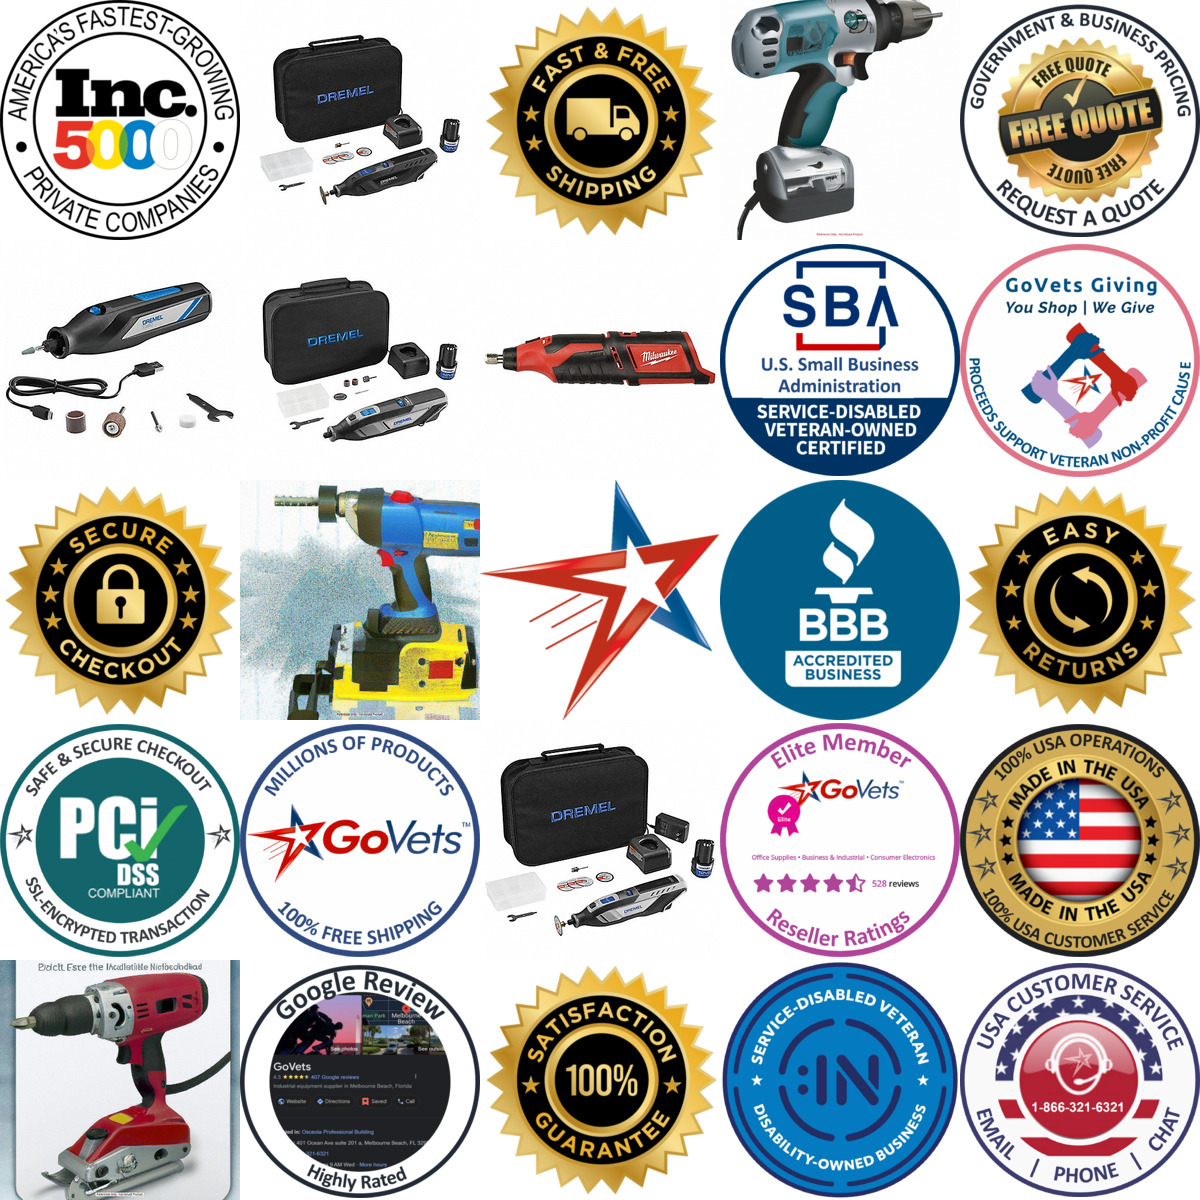 A selection of Cordless Rotary Tools products on GoVets